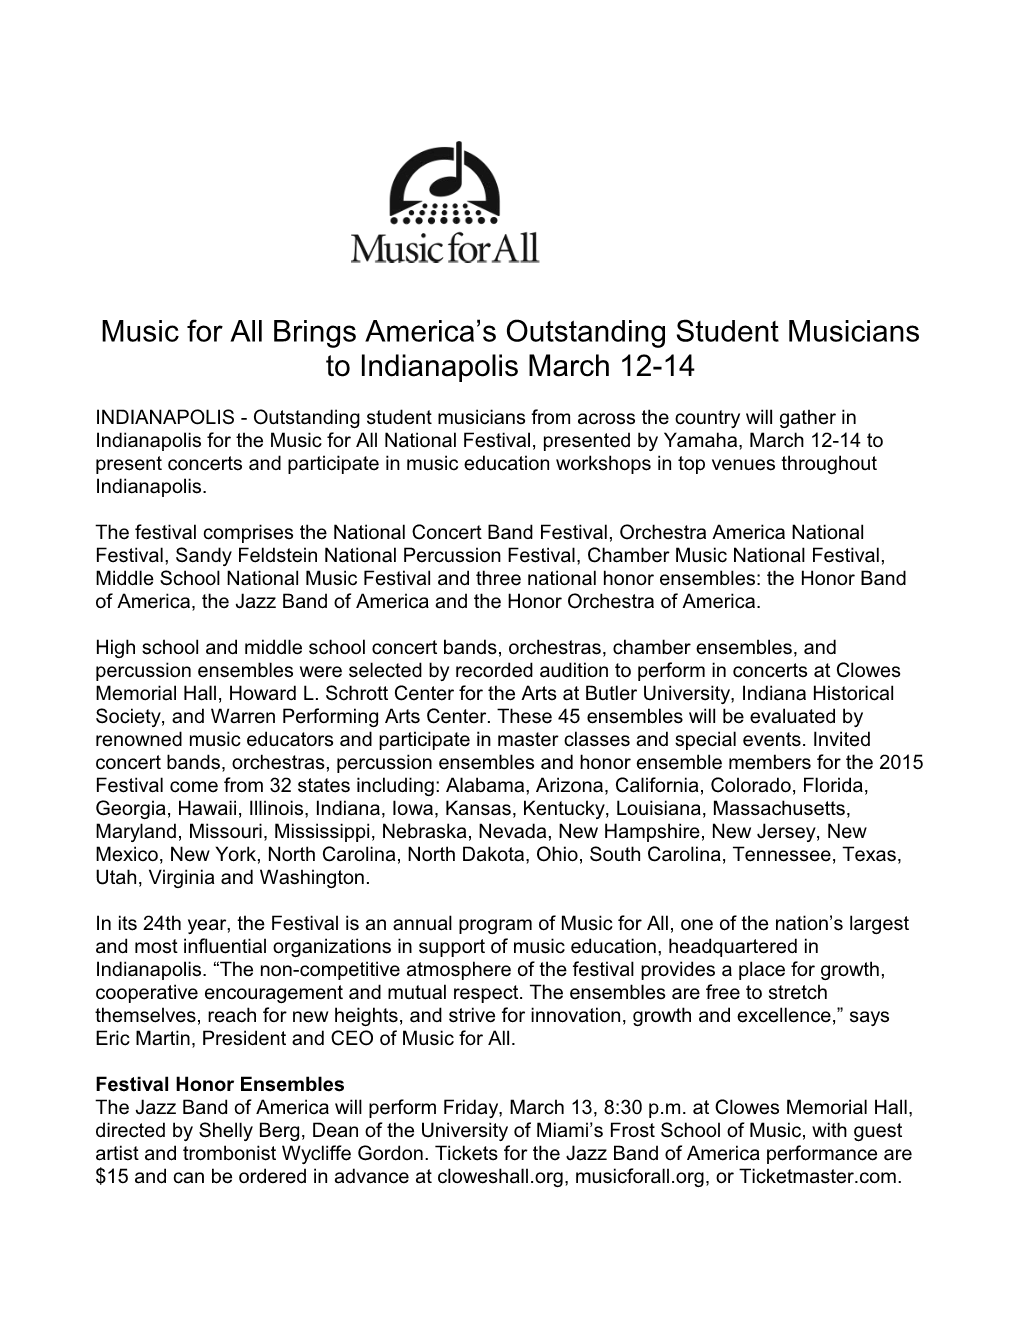 Music for All Brings America S Outstanding Student Musicians to Indianapolis March 12-14